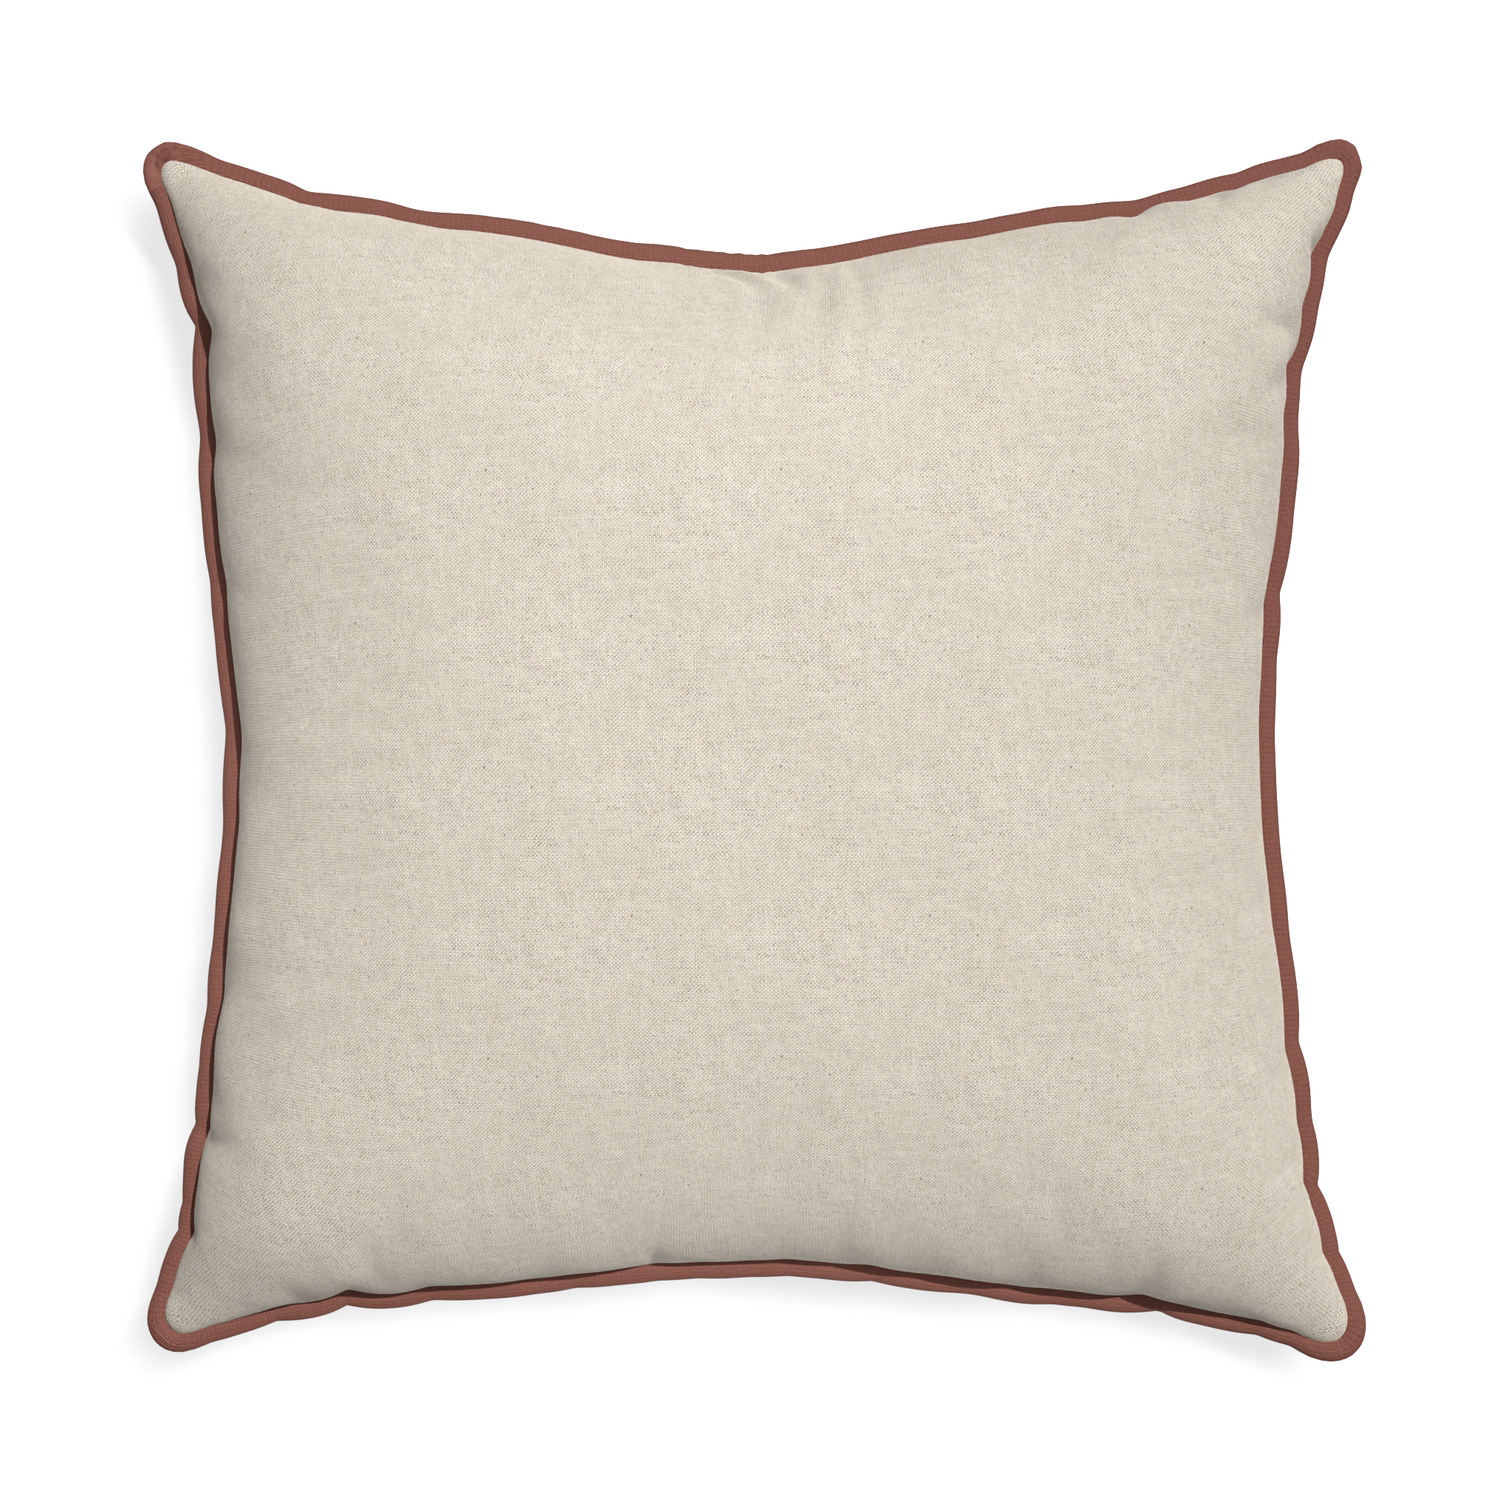 Euro-sham oat custom light brownpillow with w piping on white background